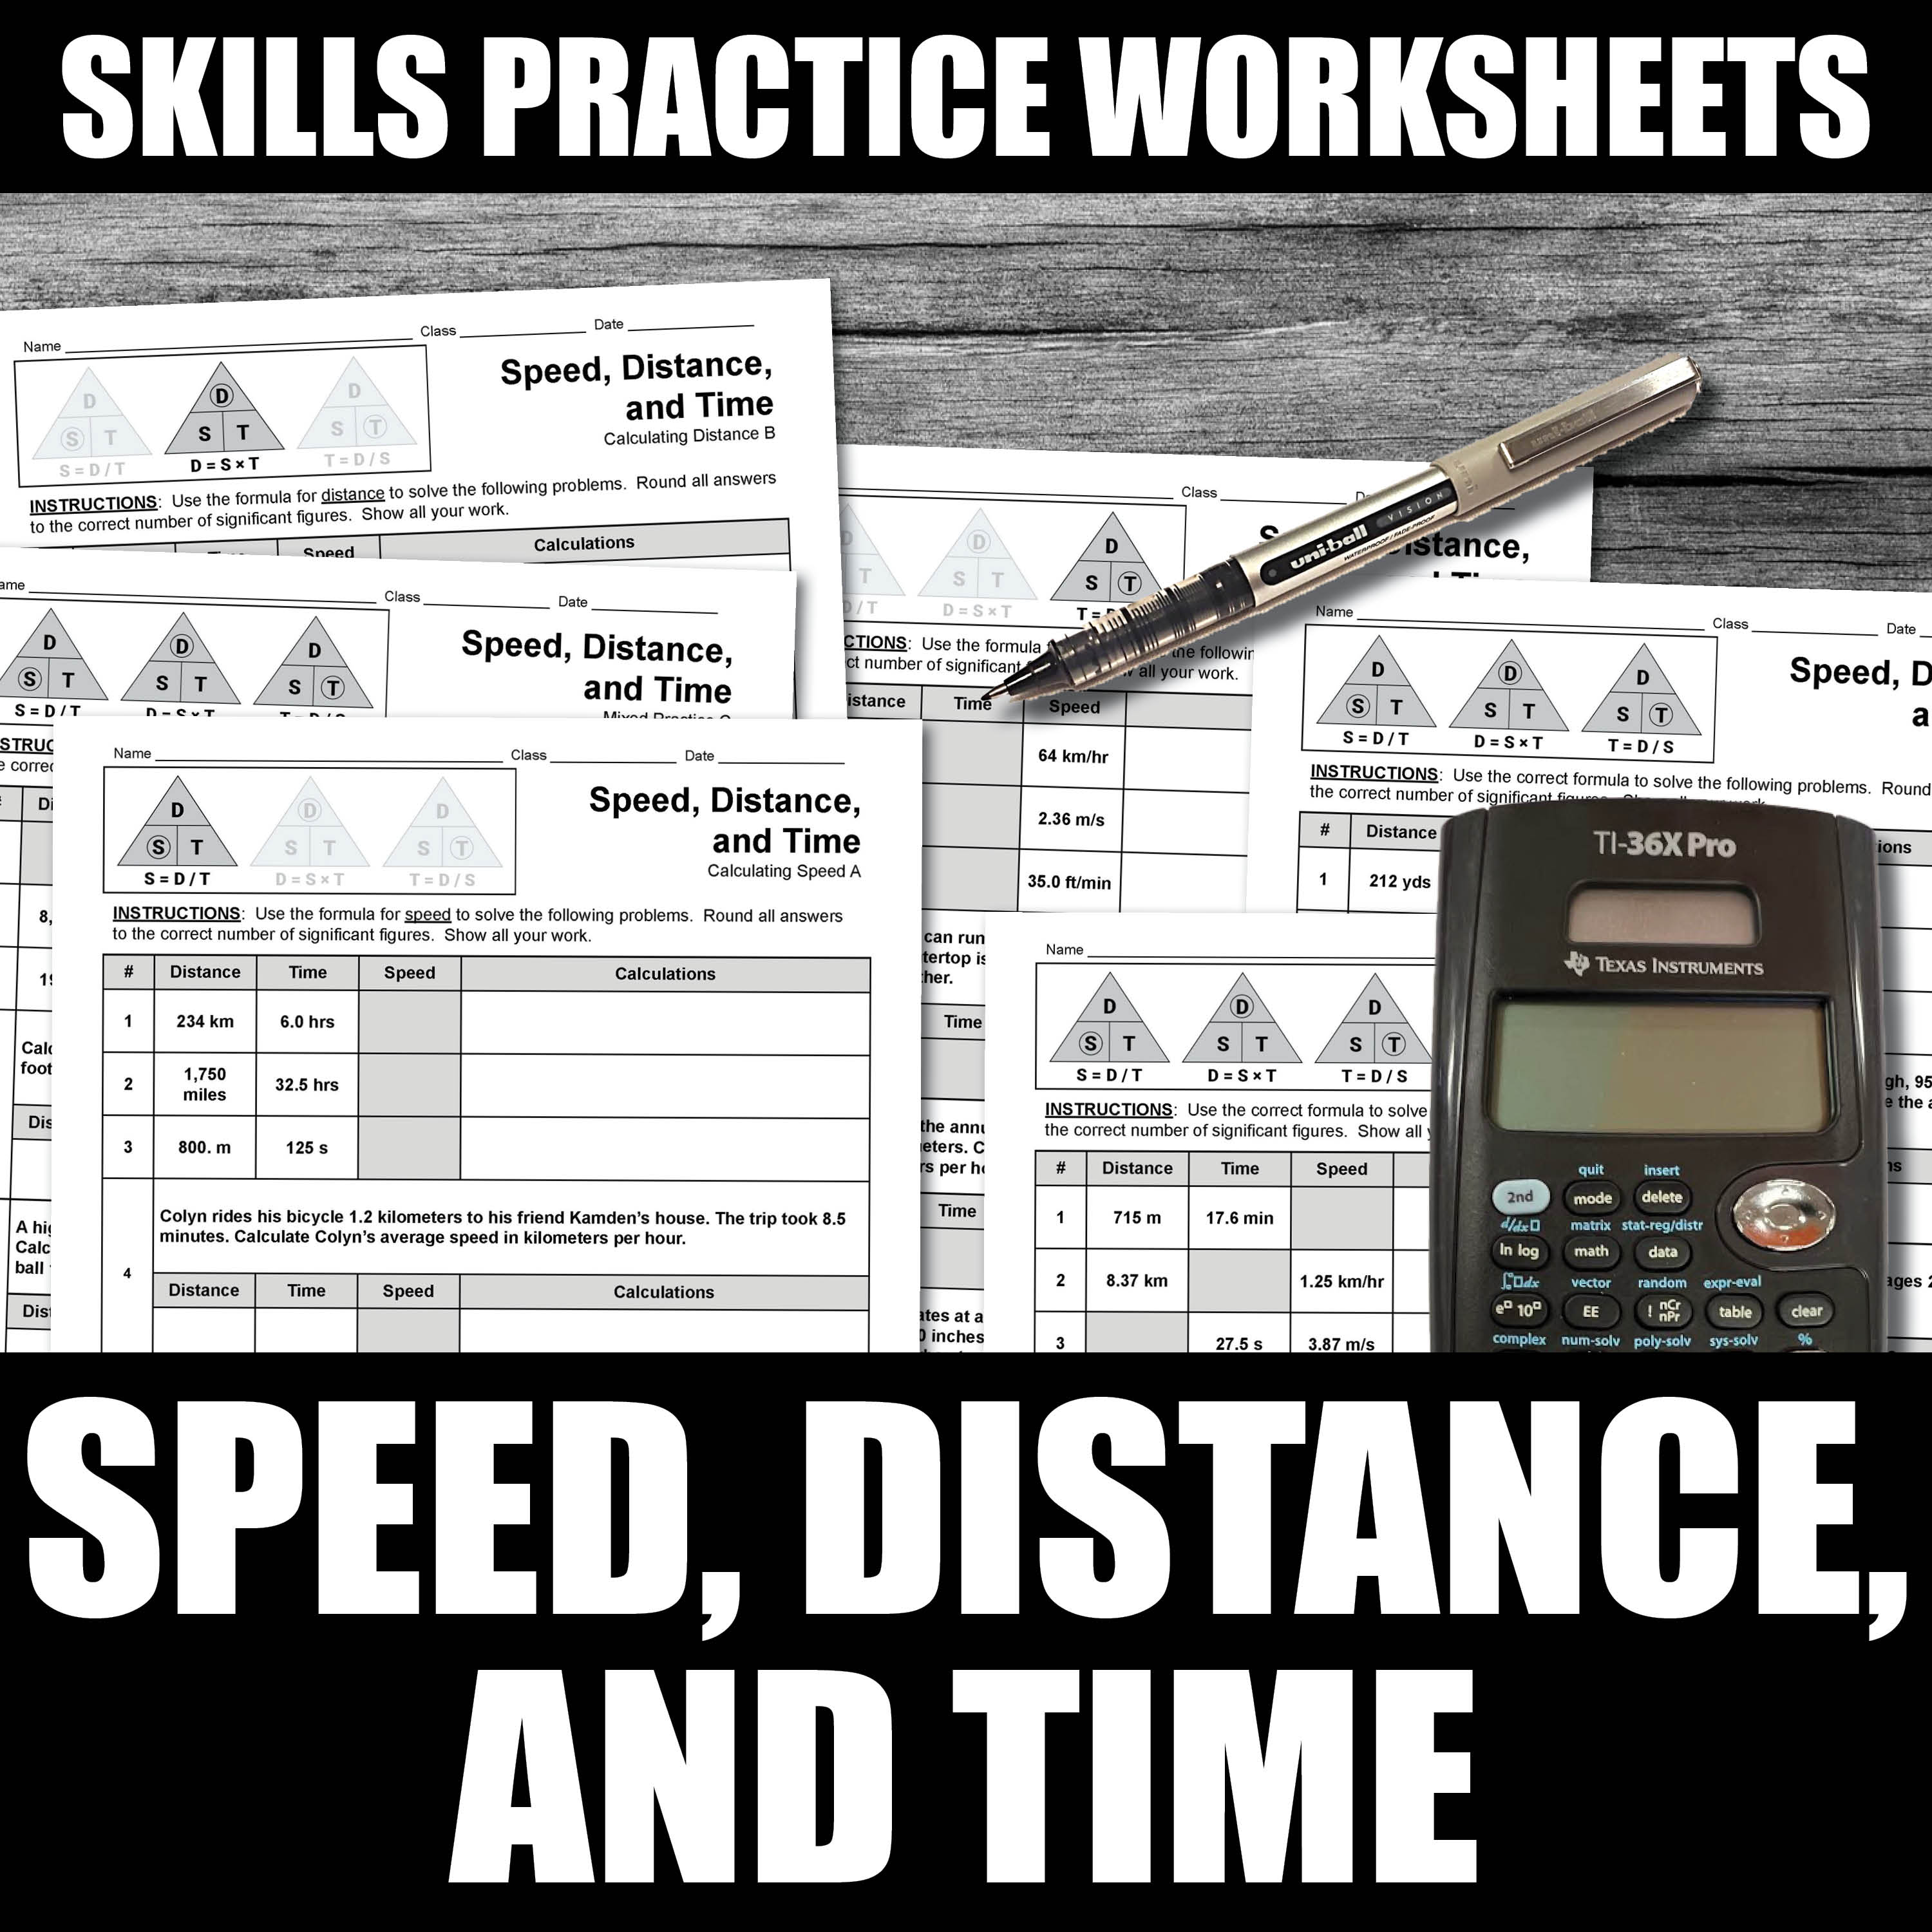 Calculating Speed, Distance, and Time Worksheets | Printable and Digital